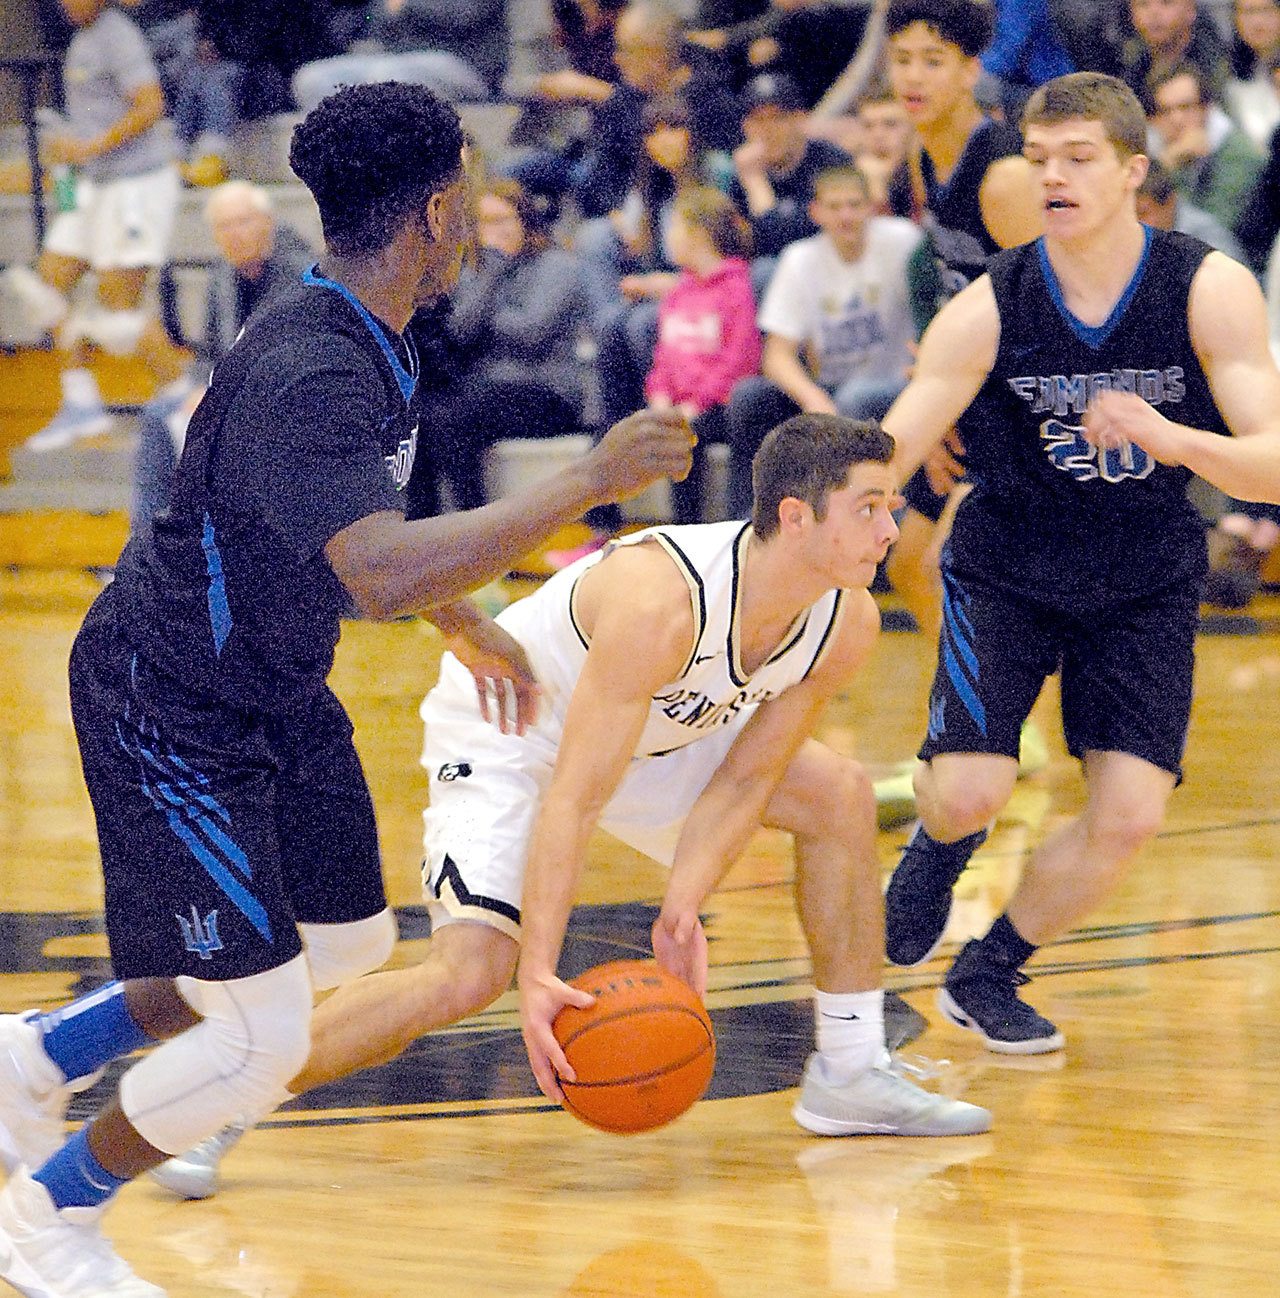 Keith Thorpe/Peninsula Daily News Peninsula’s Jalon MCCullough, center, picks up a loose ball as Edmonds’ Chiagozie Ezeokeke, left, and Mitch Wetmore try to close in on Saturday night on Peninsula’s Port Angeles campus.